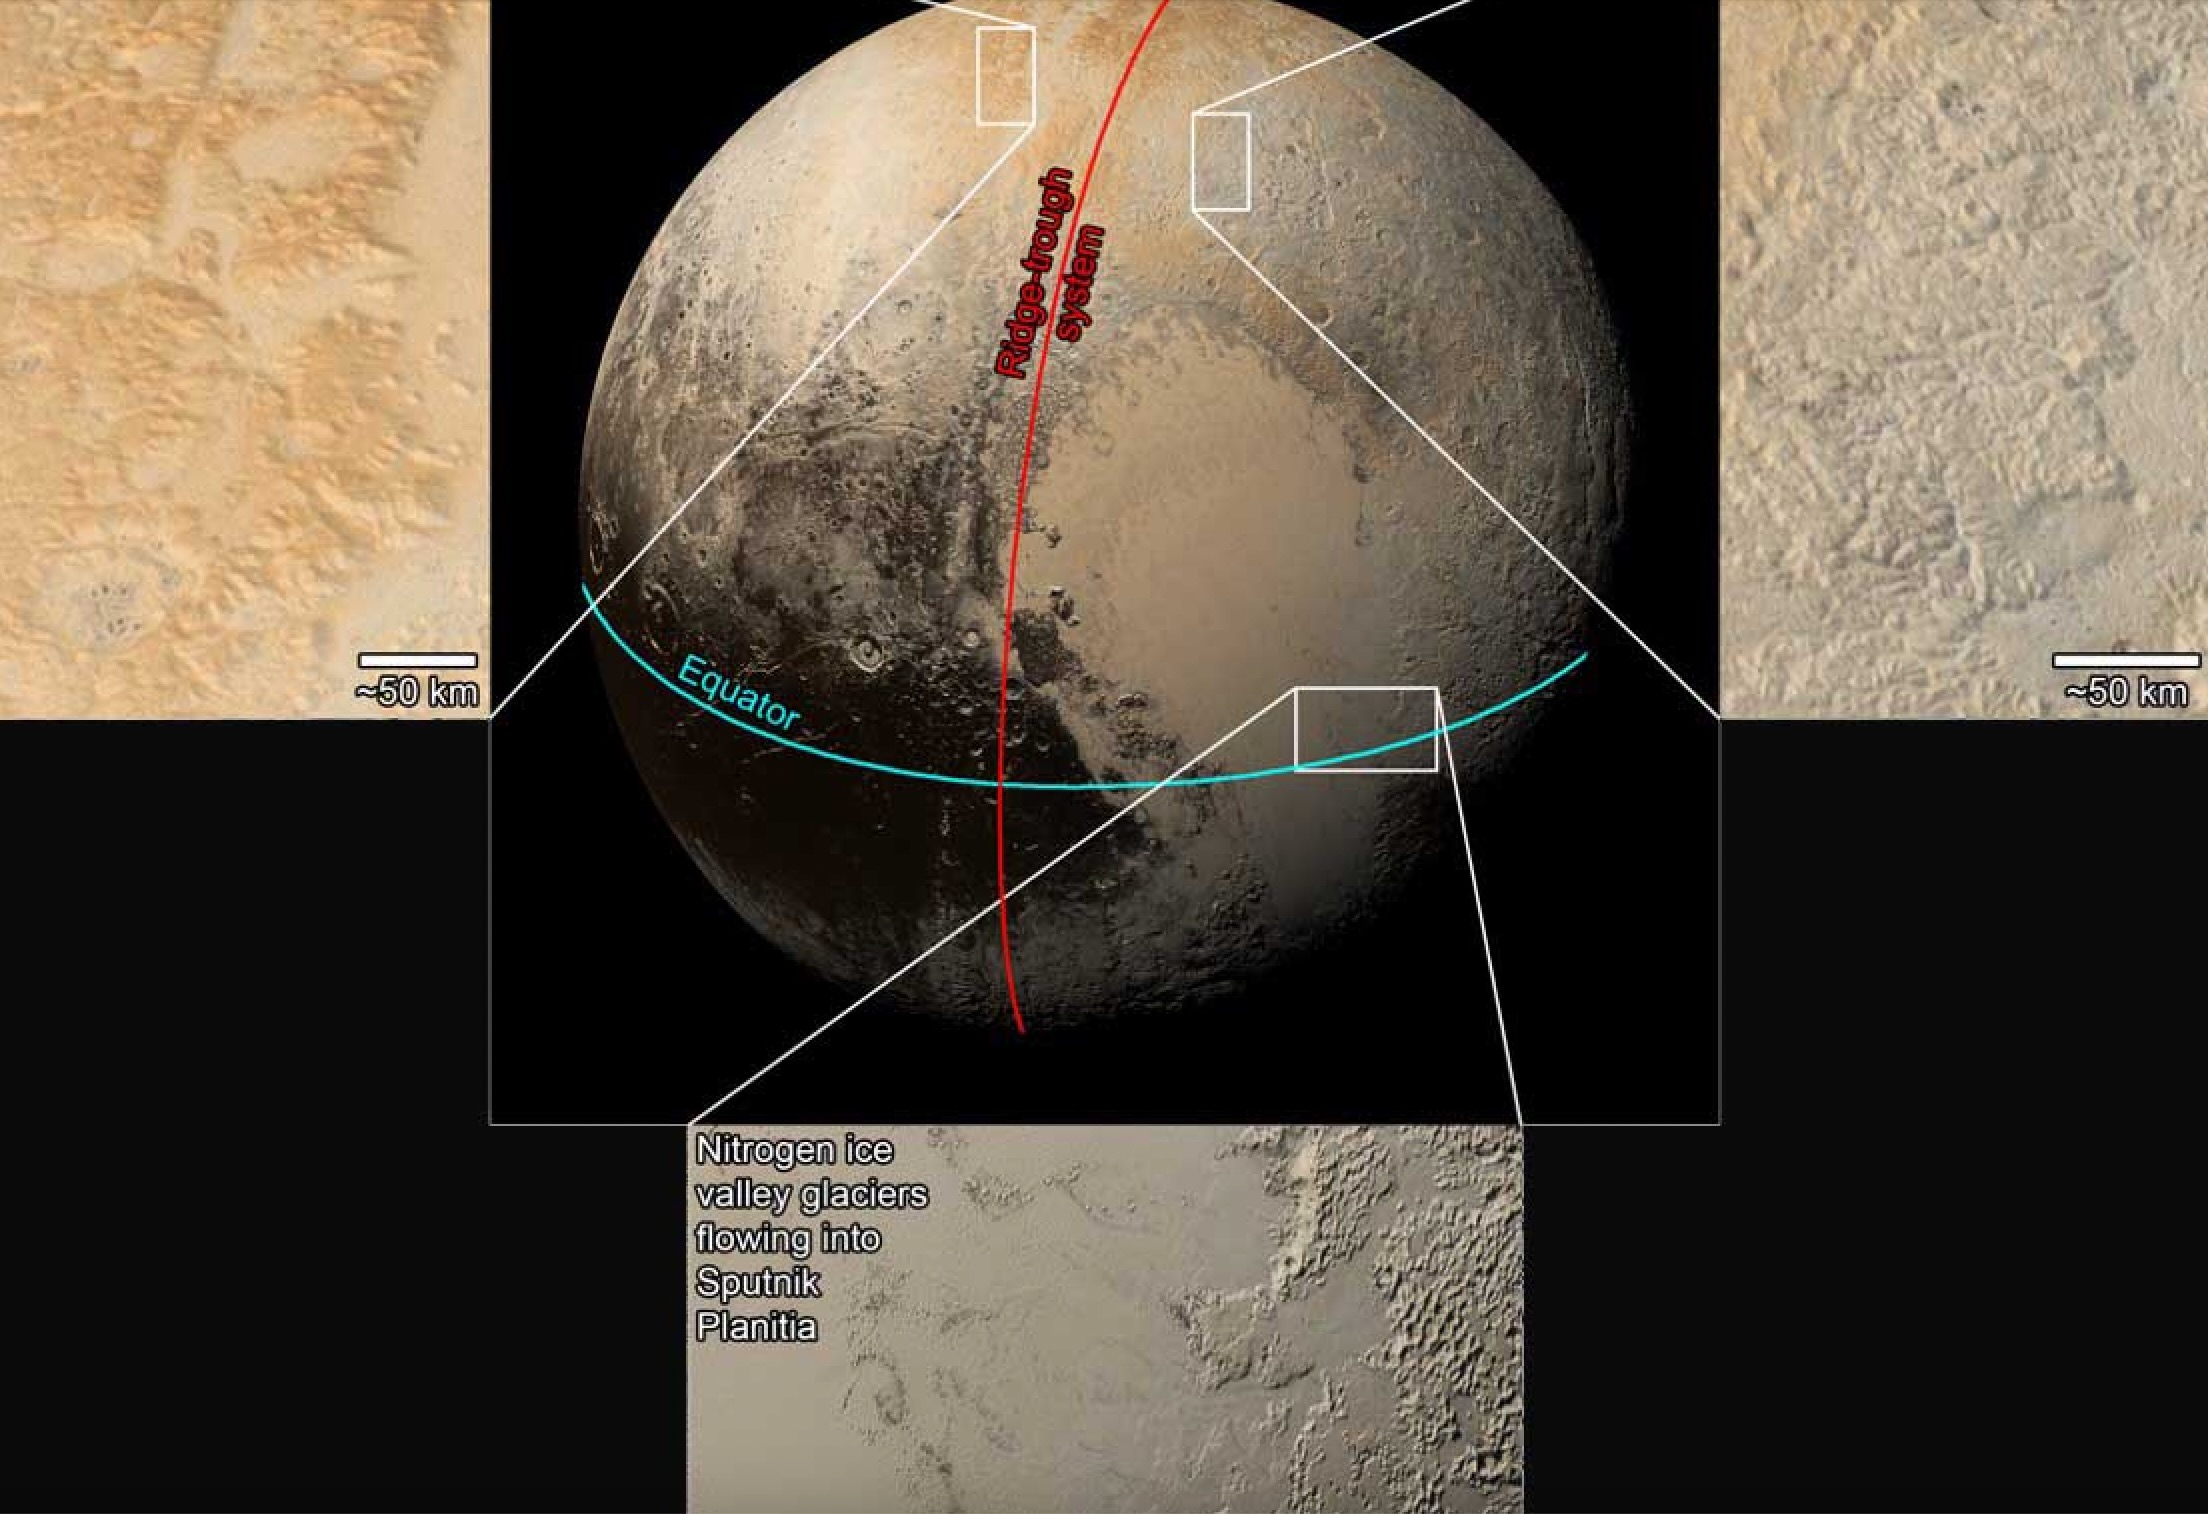 The line in red reflects the system of valleys and mountain ranges that scientists think migrated from Pluto's equator to their current positions near its poles.